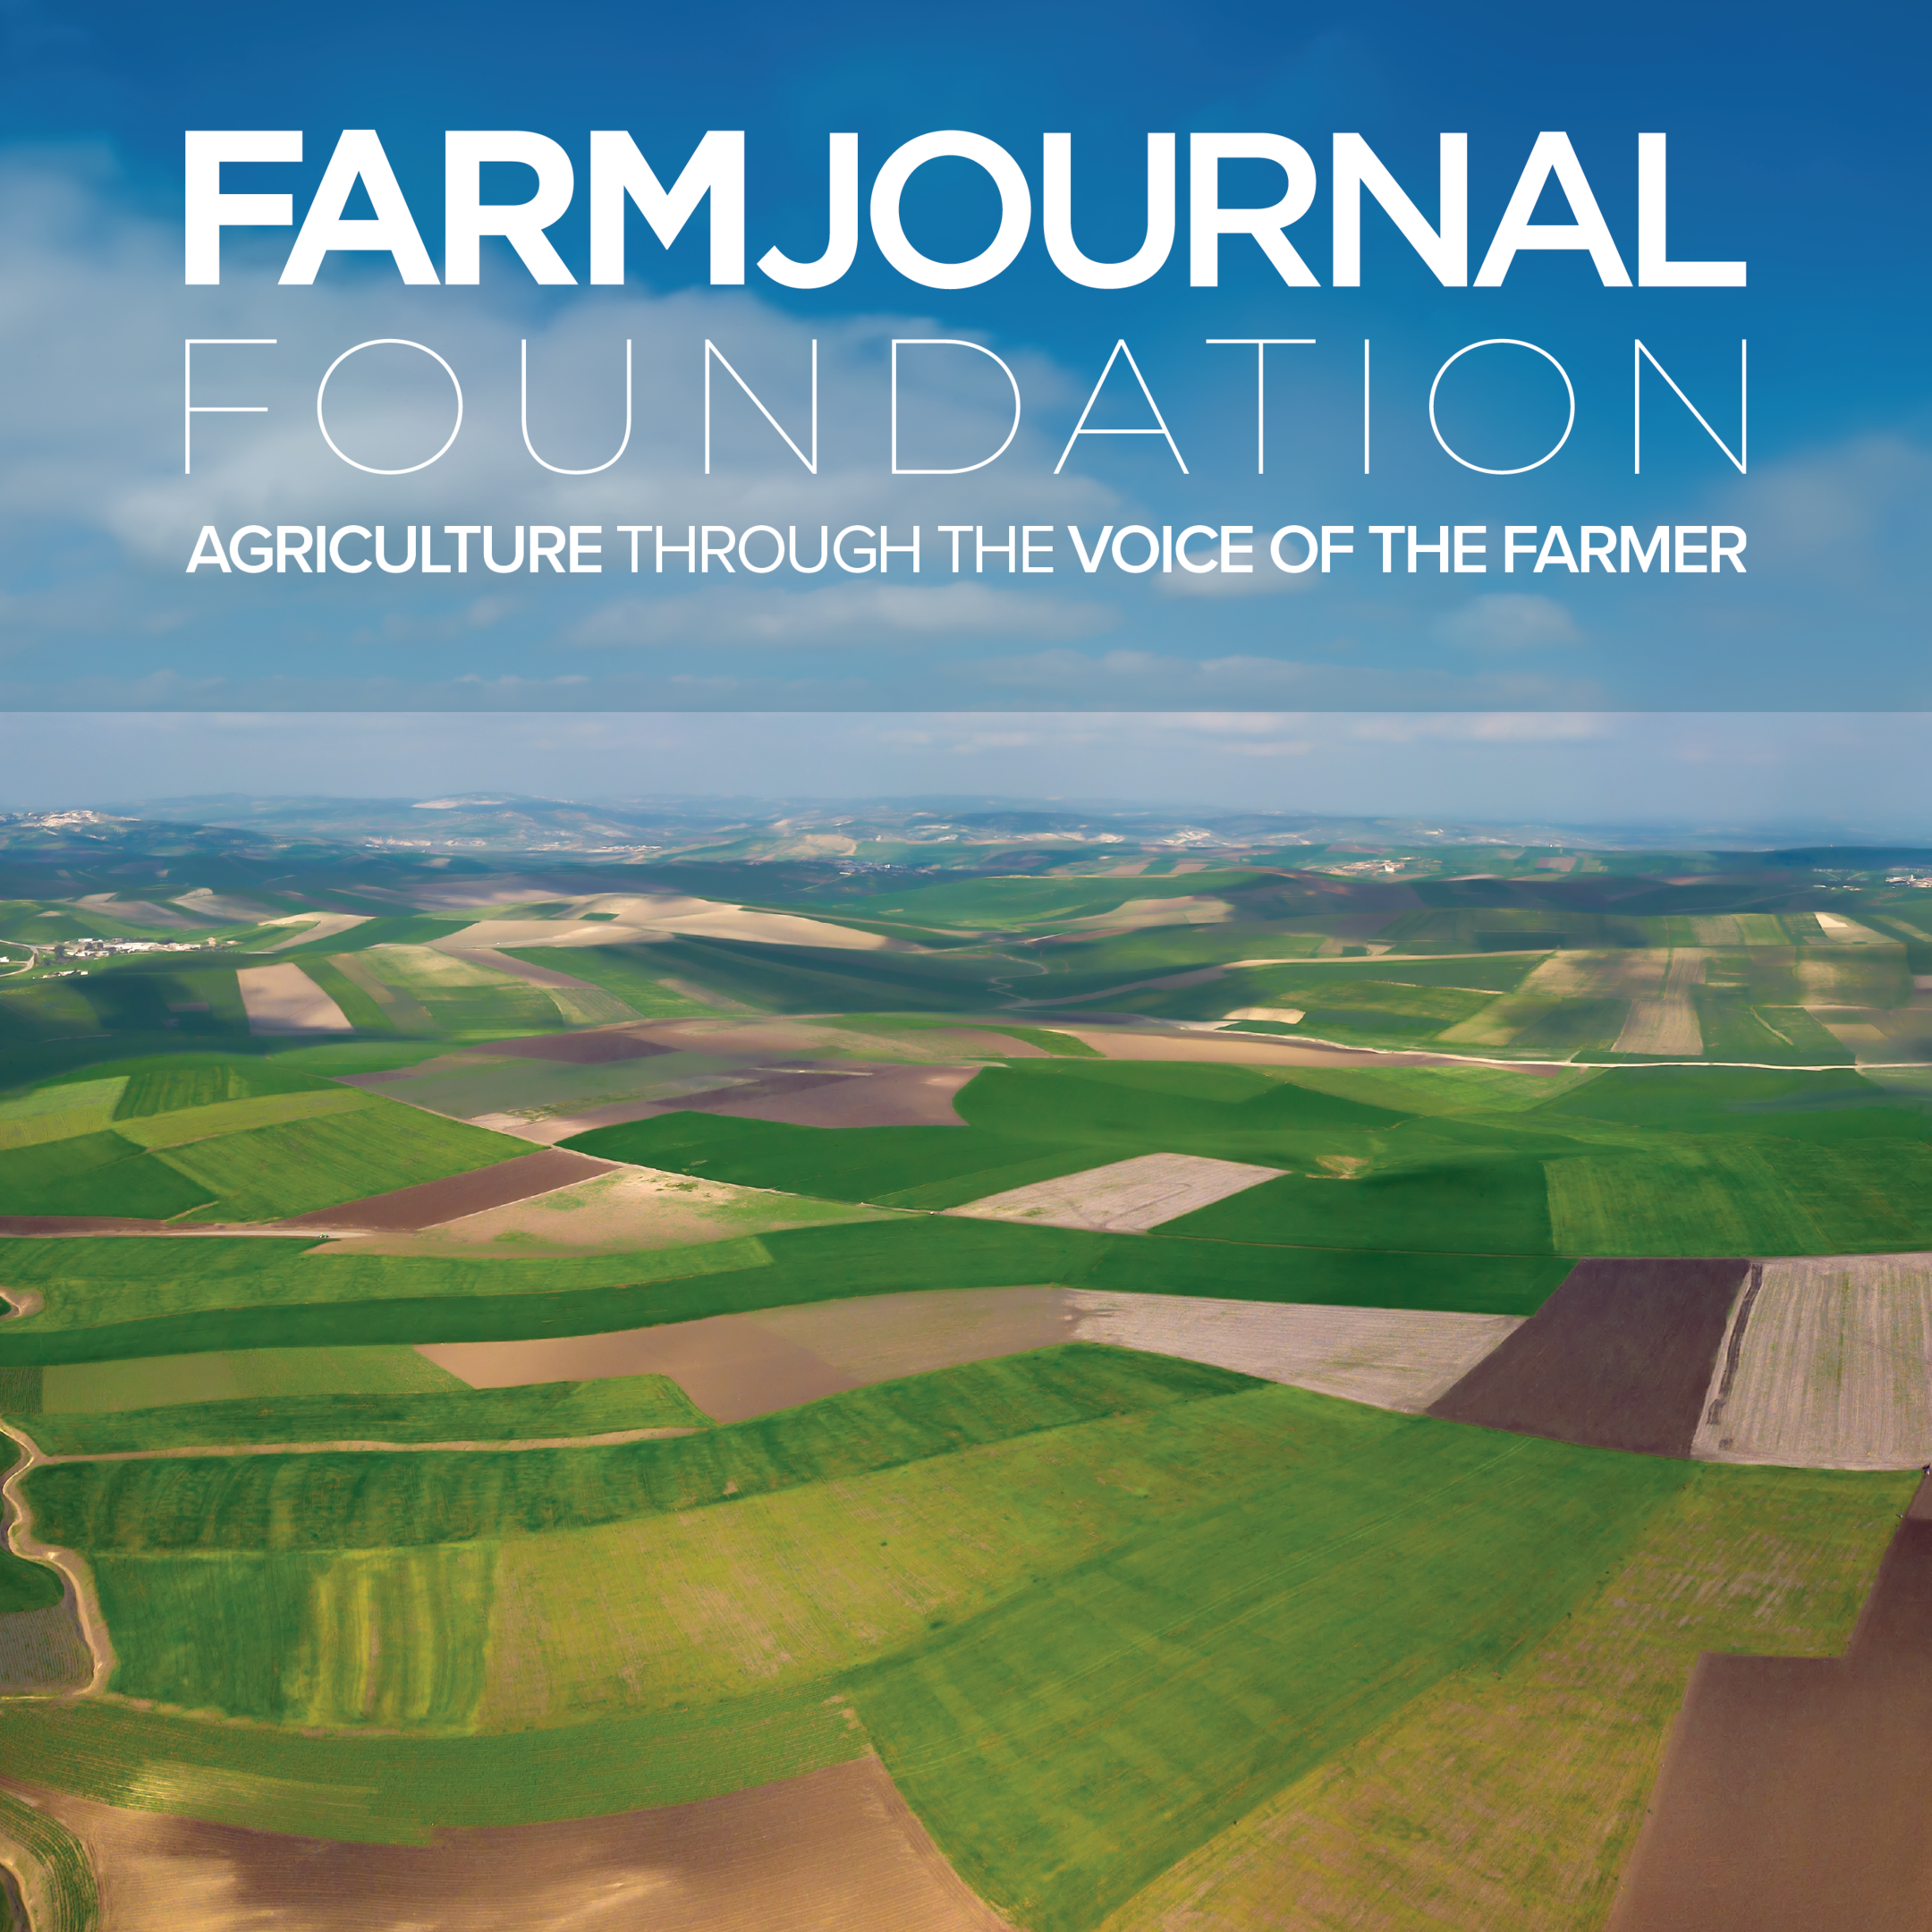 farm-journal-agricultural-foundation_processed_112b703f305d2eecb95f7374f15c1da669582dc9de7b0fead3f9702f4efa94bc_background_image-1.png